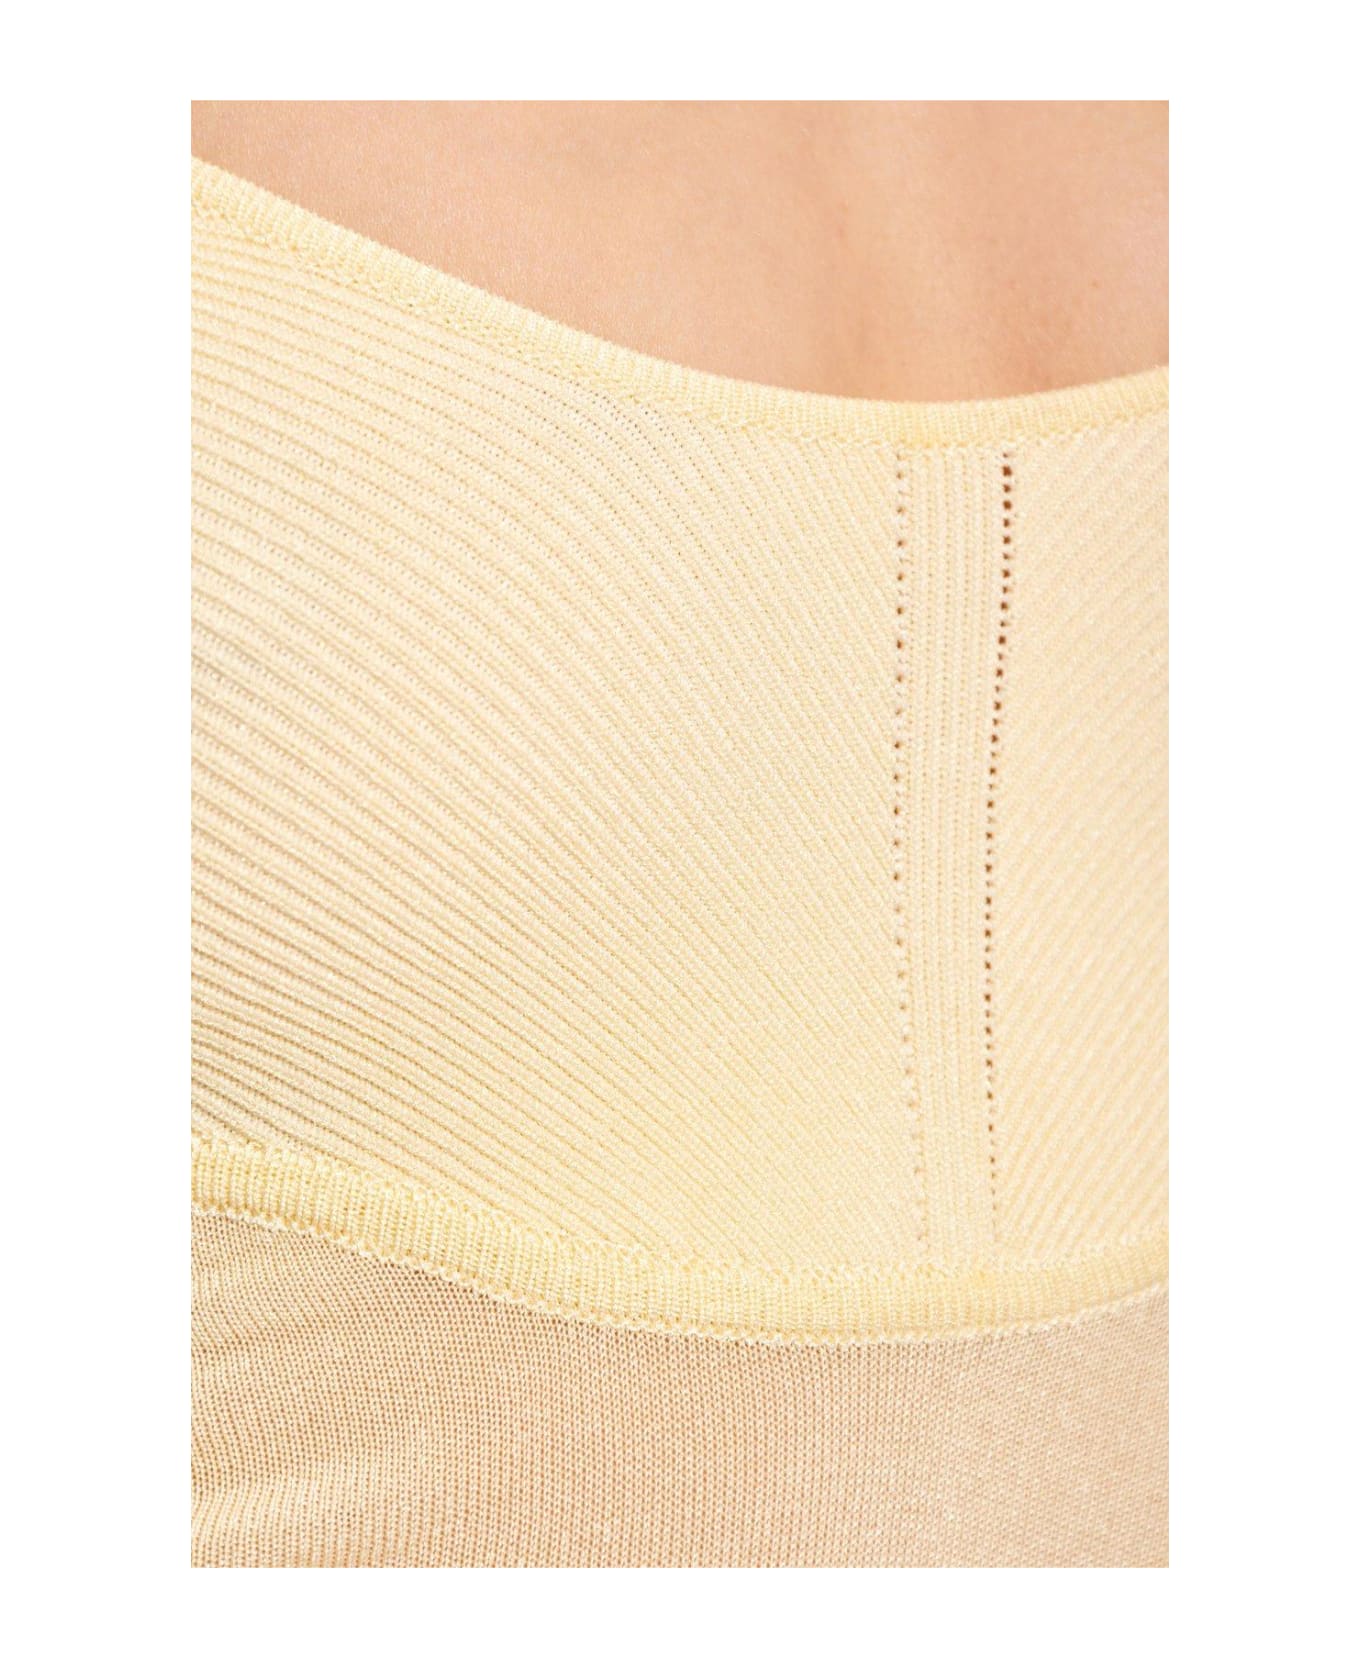 Jacquemus Strapped Maxi Dress - Light yellow